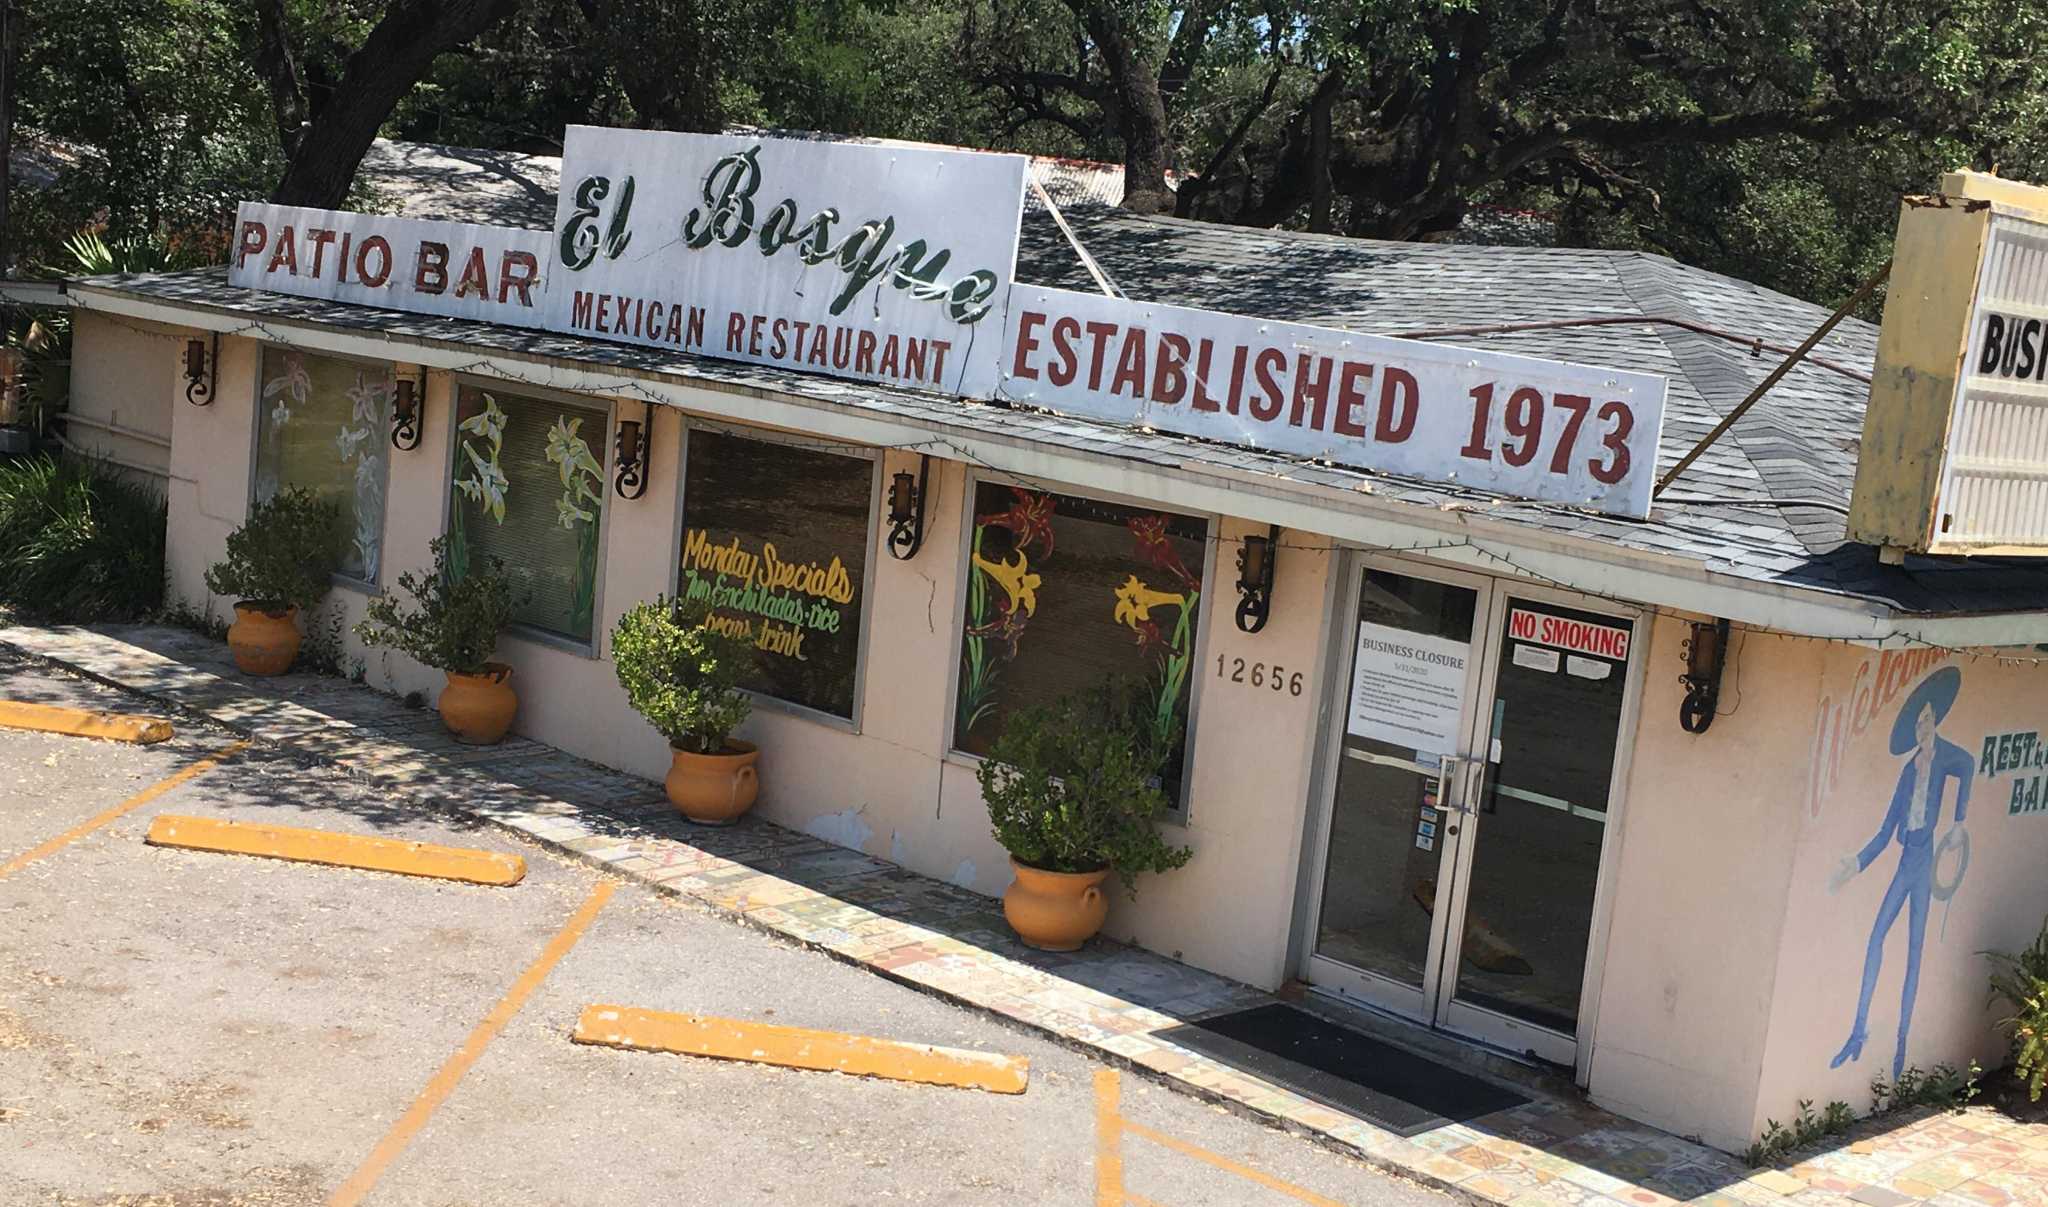 El Bosque Mexican Restaurant On The North Side Of San Antonio Closes After More Than 40 Years Because Of Impact Of Coronavirus